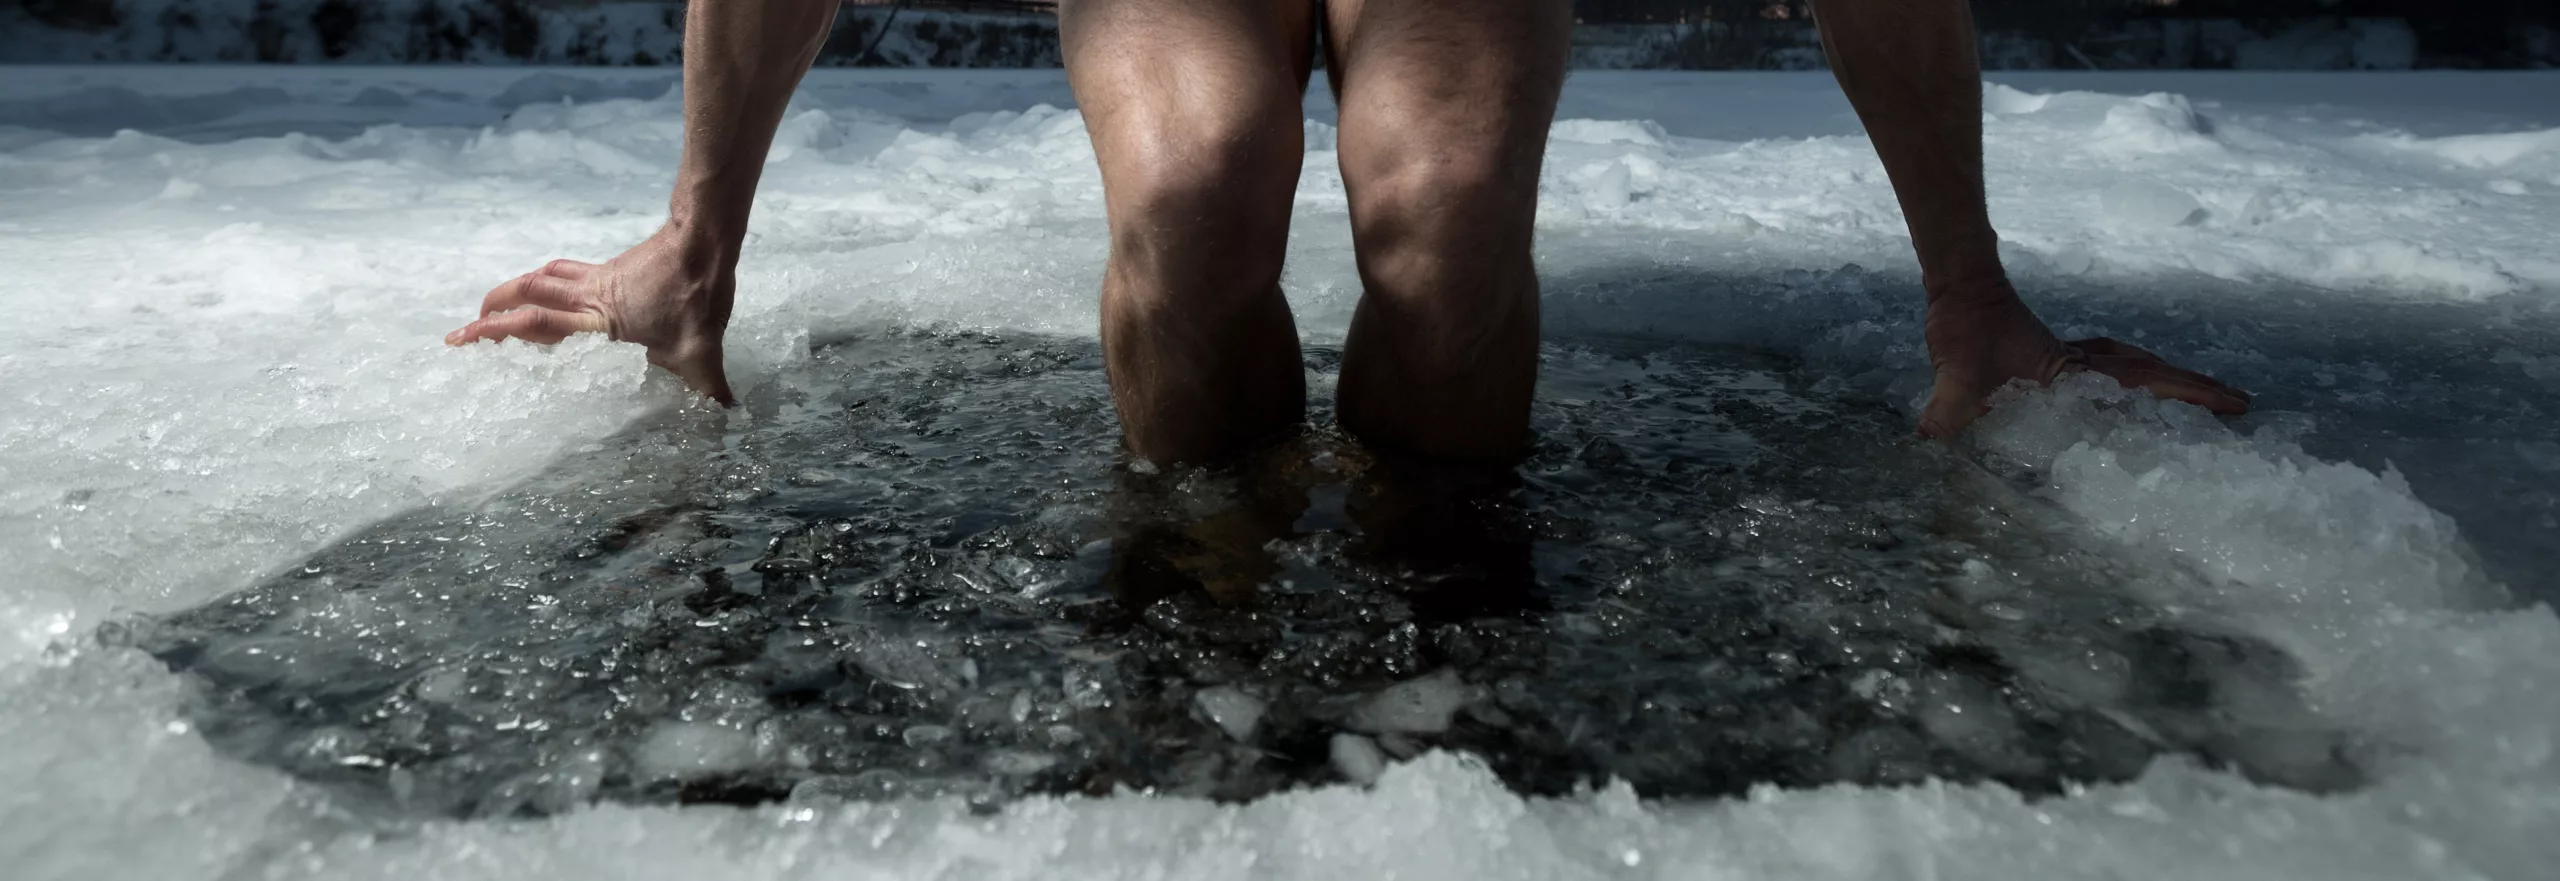 Cold Water Immersion, Ice Bath, Cold Plunge